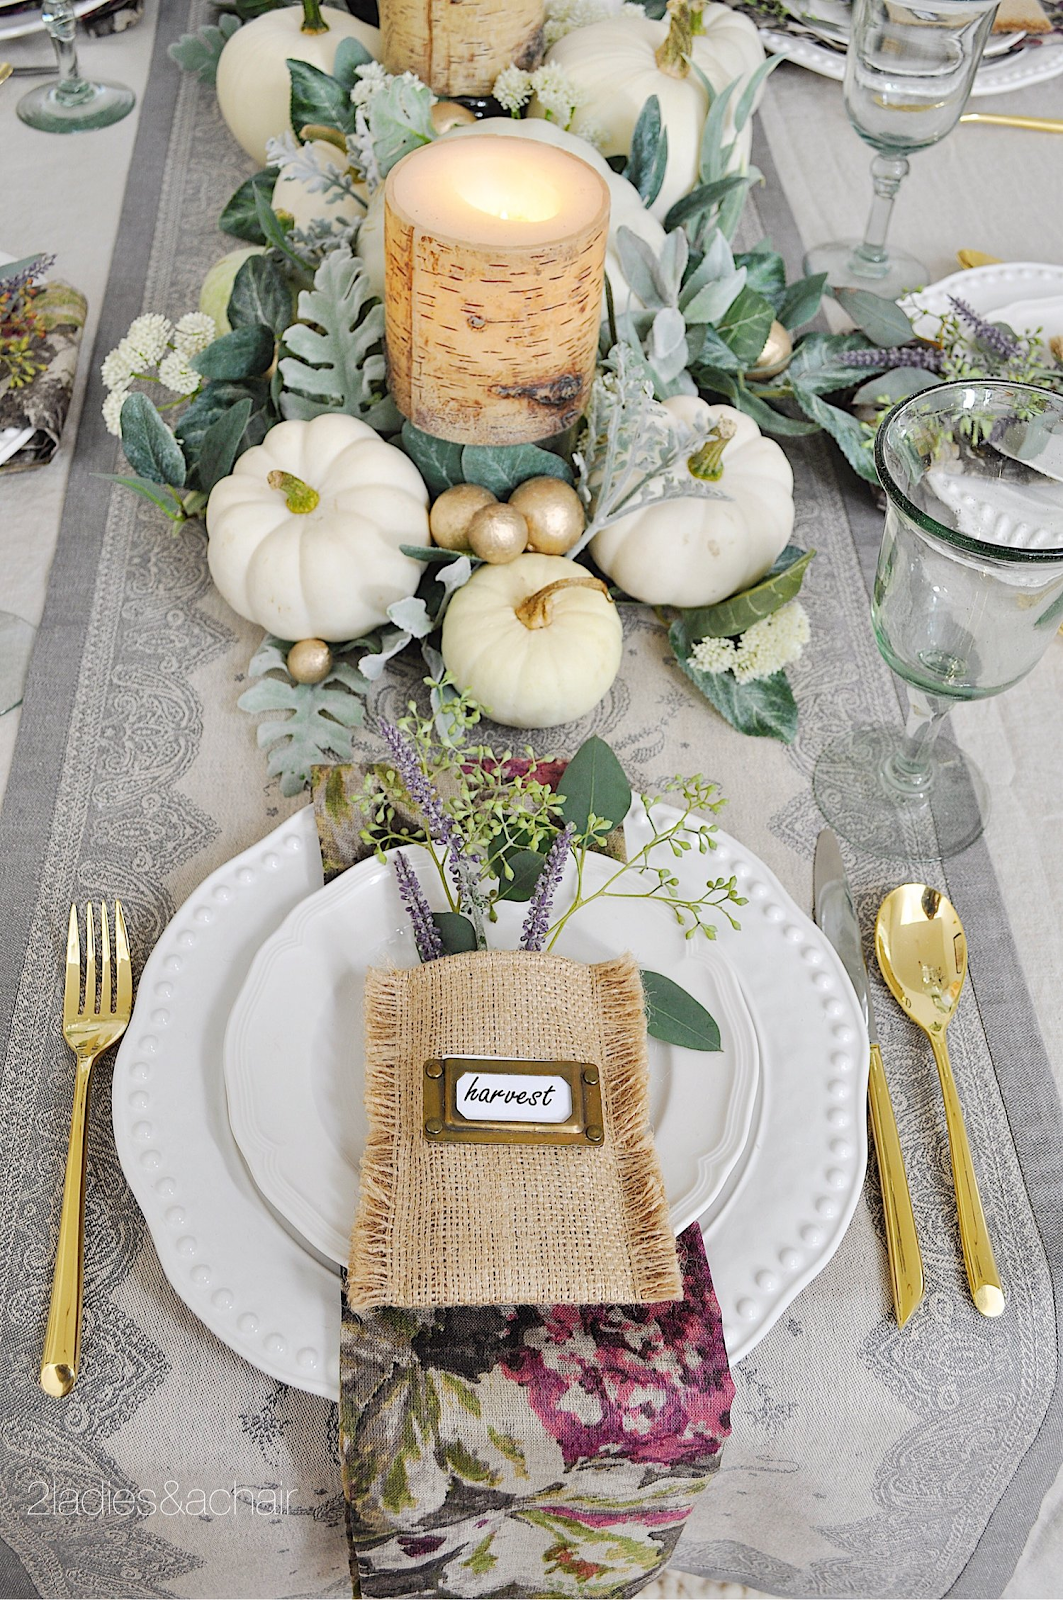 elegant fall table setting with gold silverware, white pumpkins, white candles, green foliage and white dishware